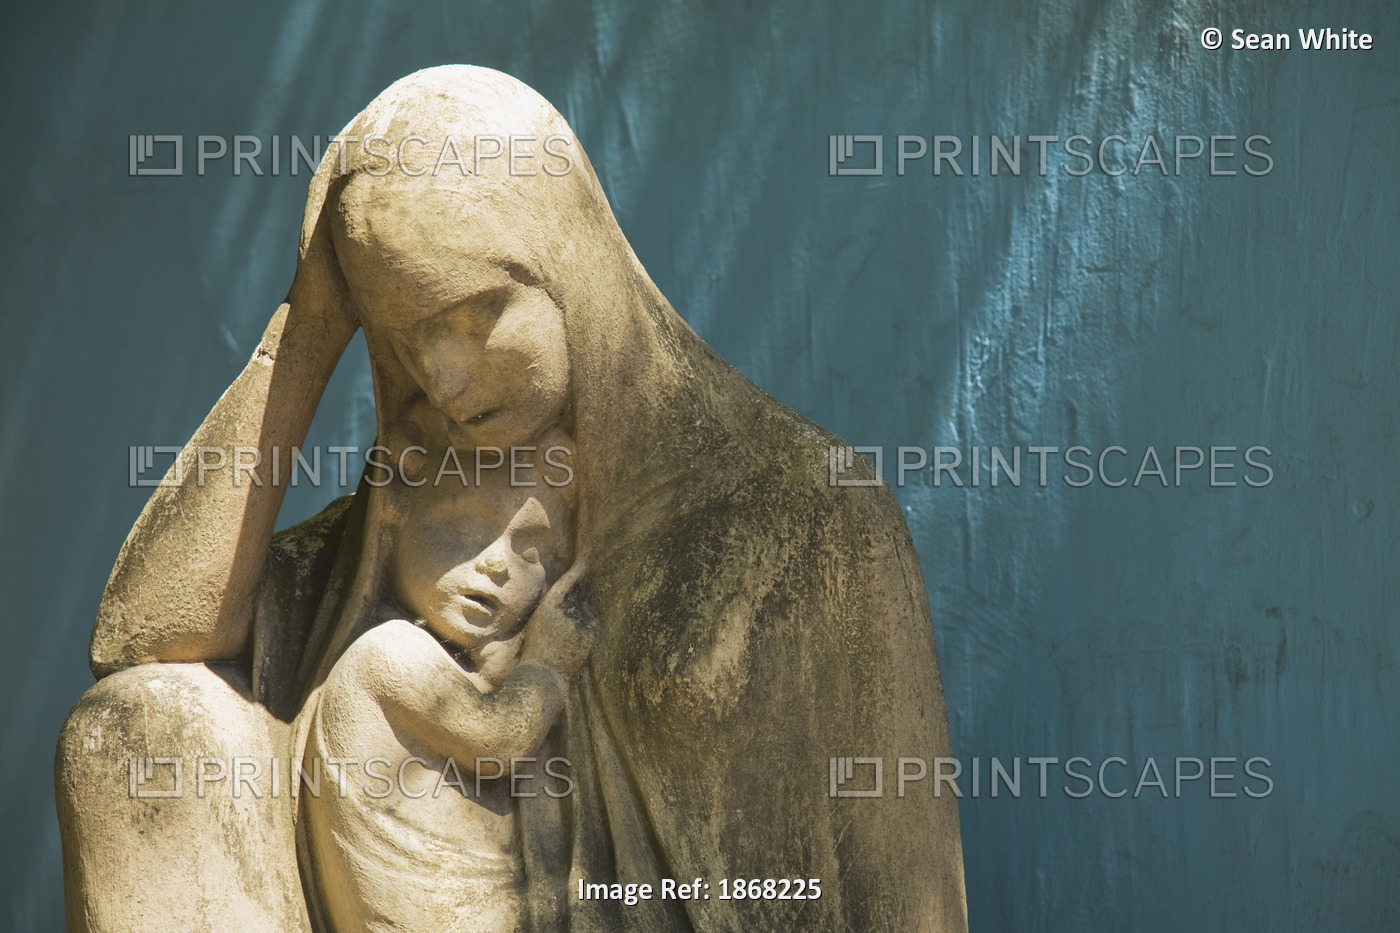 Stone Statue Of The Virgin Mary Holding Jesus, Buenos Aires, Argentina